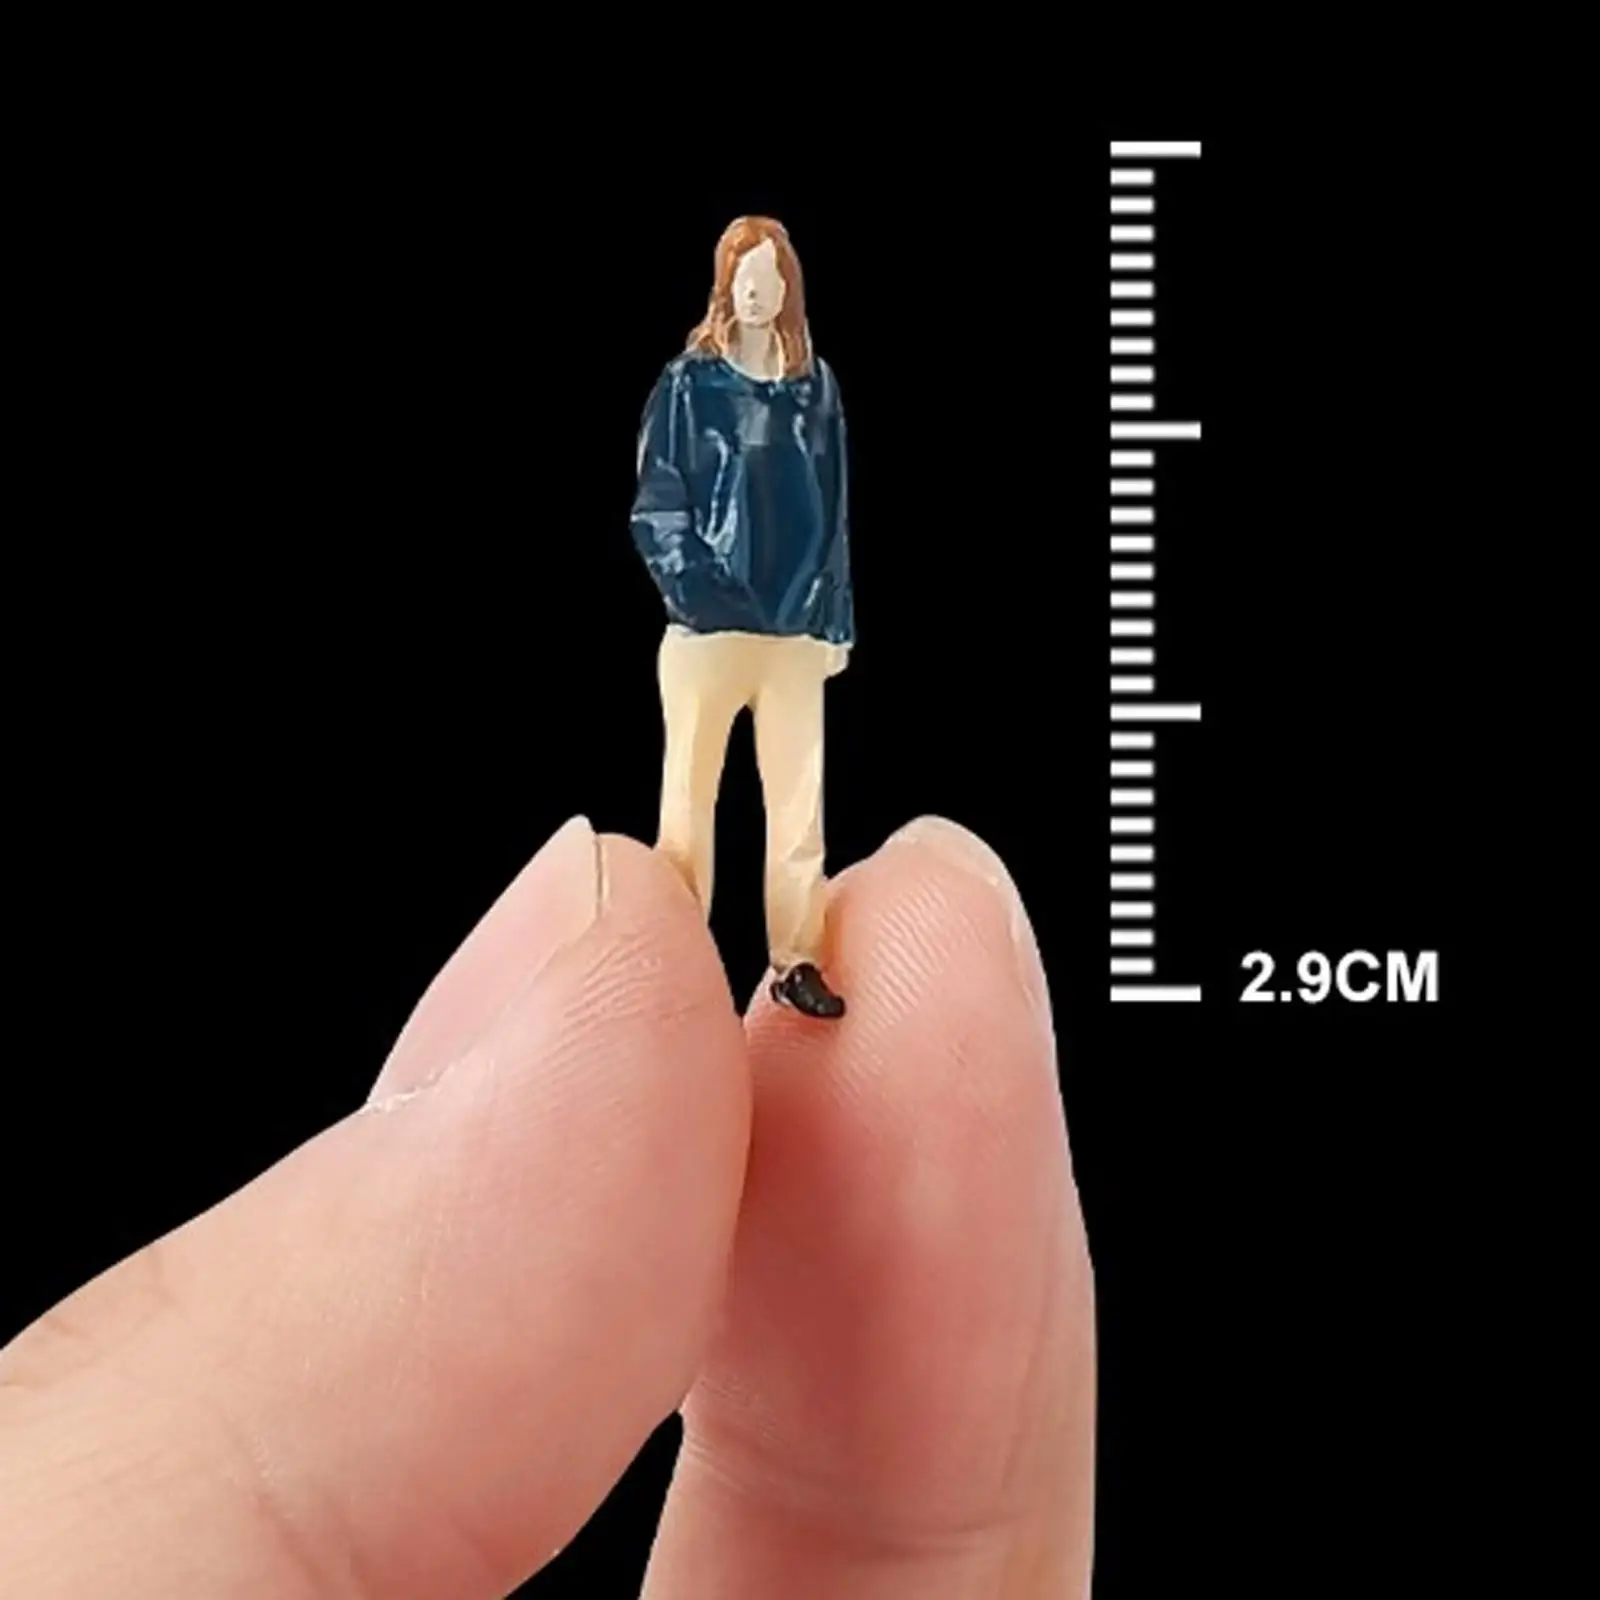 1:64 Scale Figure Handpainted Cool Girl Miniature for Architecture Model Building